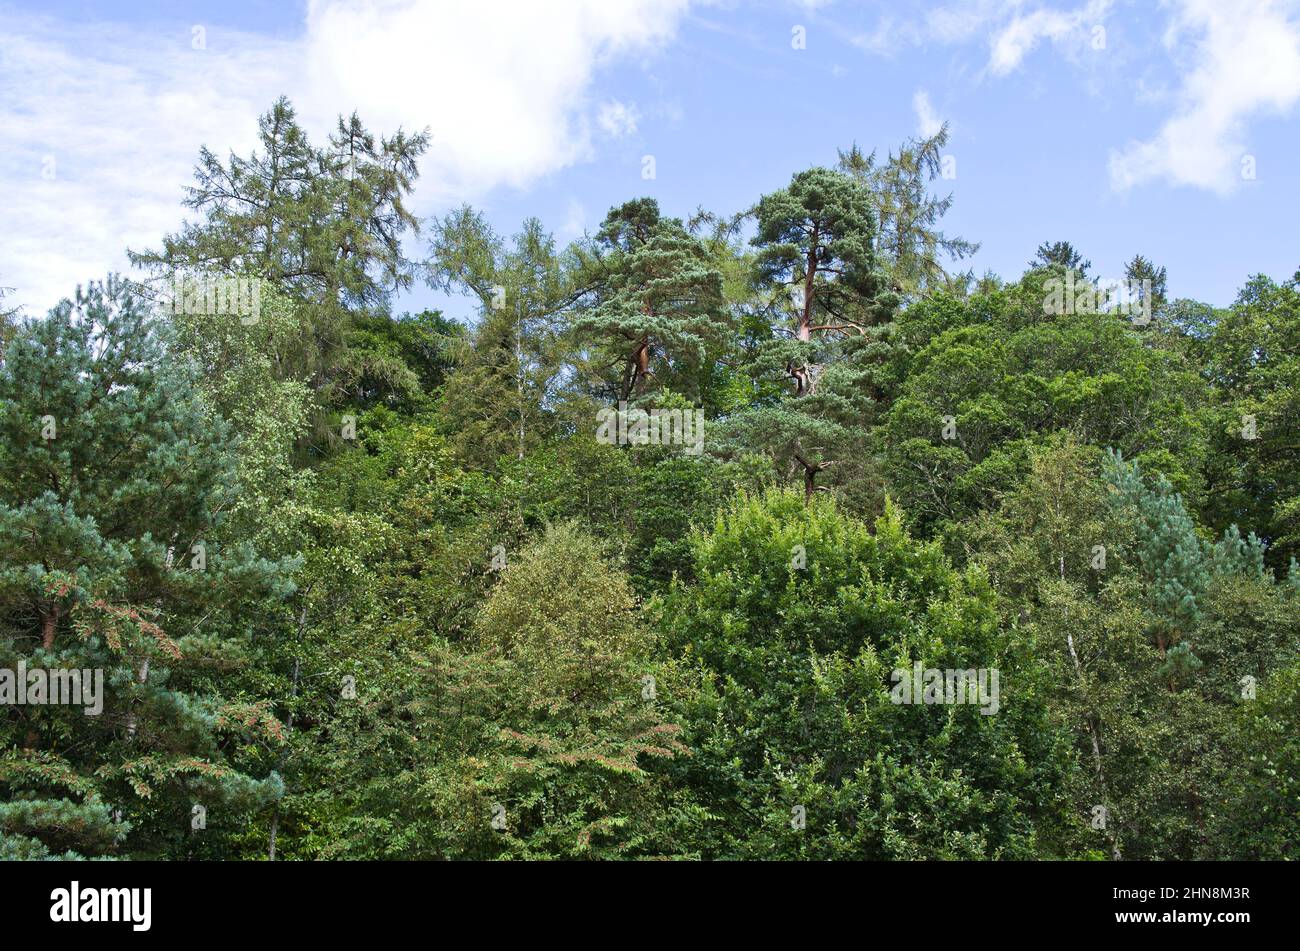 Looking up at treetops of lush mixed woodland on a steep hillside at Dunkeld, Perthshire, Scotland UK, with a backdrop of blue sky, late summer. Stock Photo